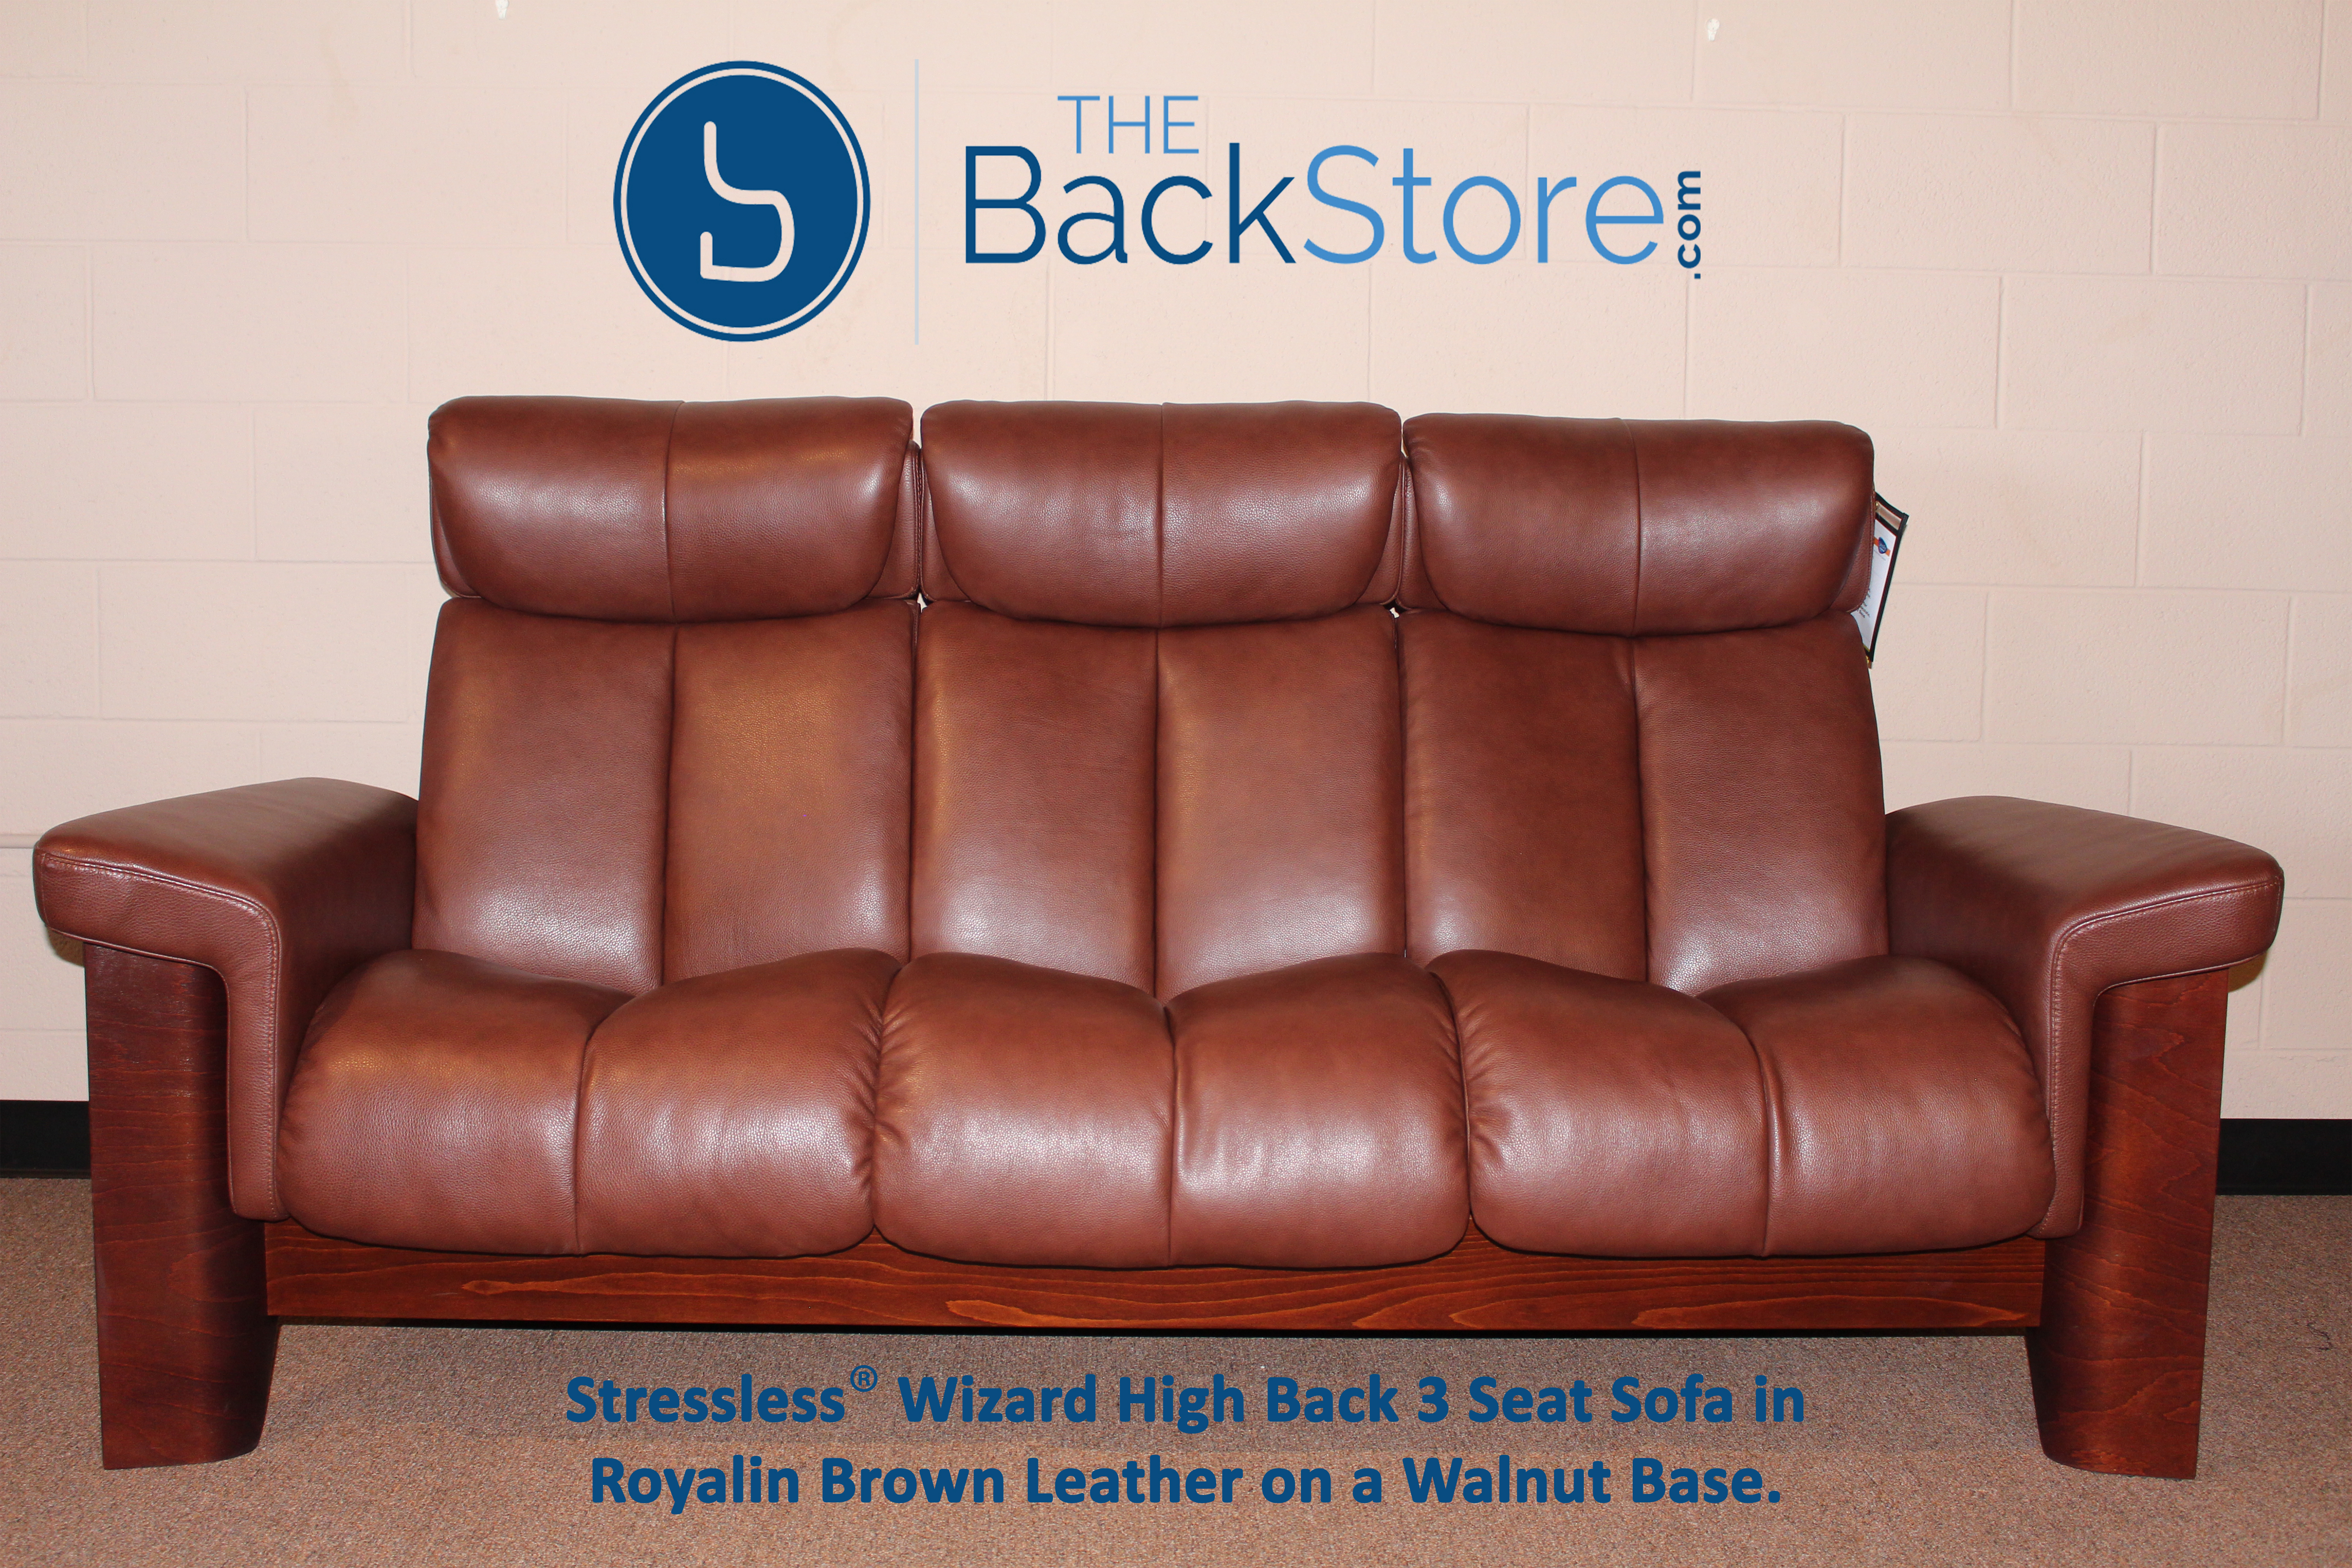 Stressless Wizard 3 Seat High Back Sofa, Ekornes Leather Colors